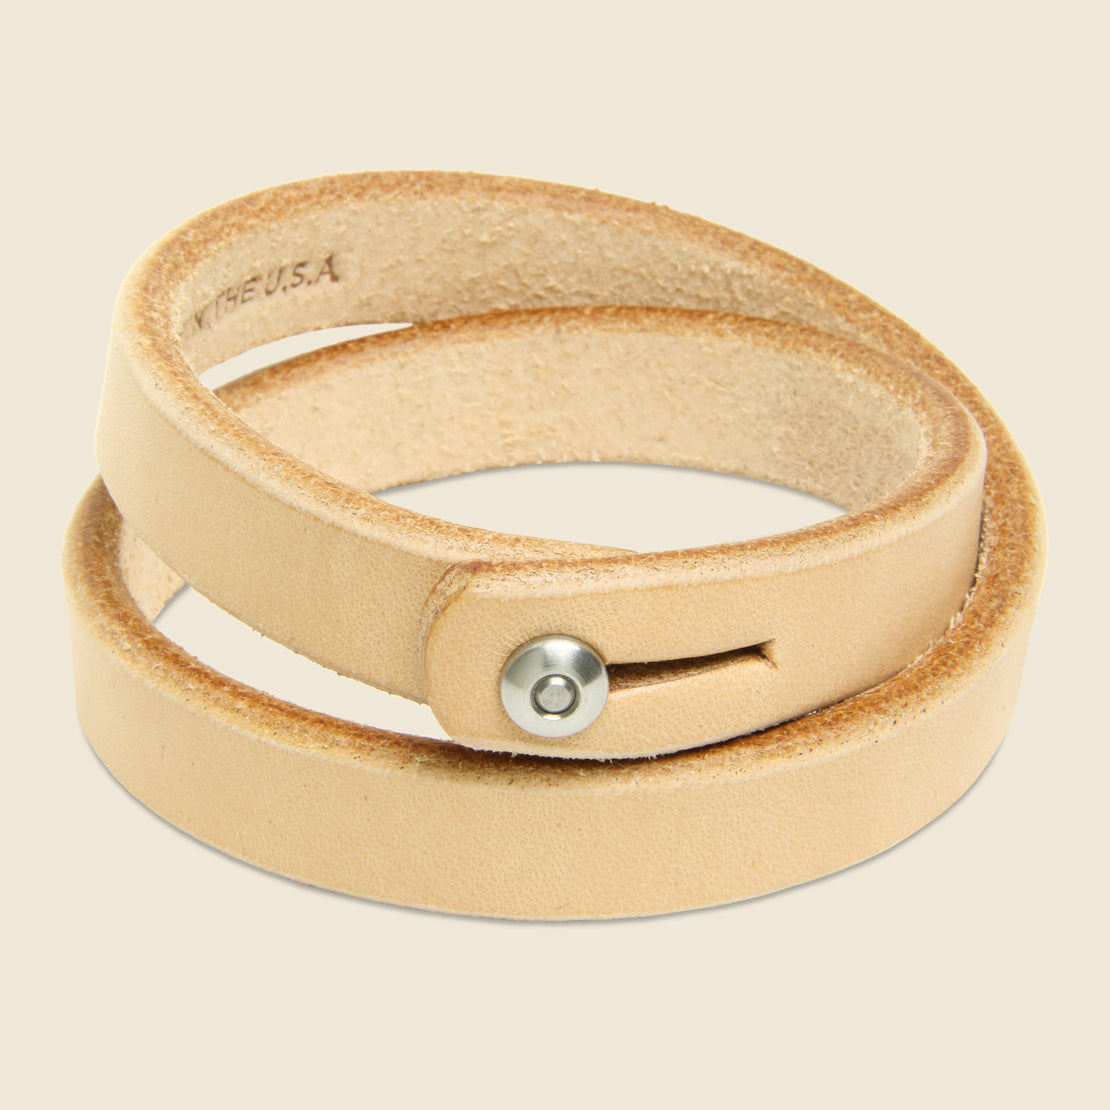 Tanner Double Wrap Wristband - Natural/Stainless